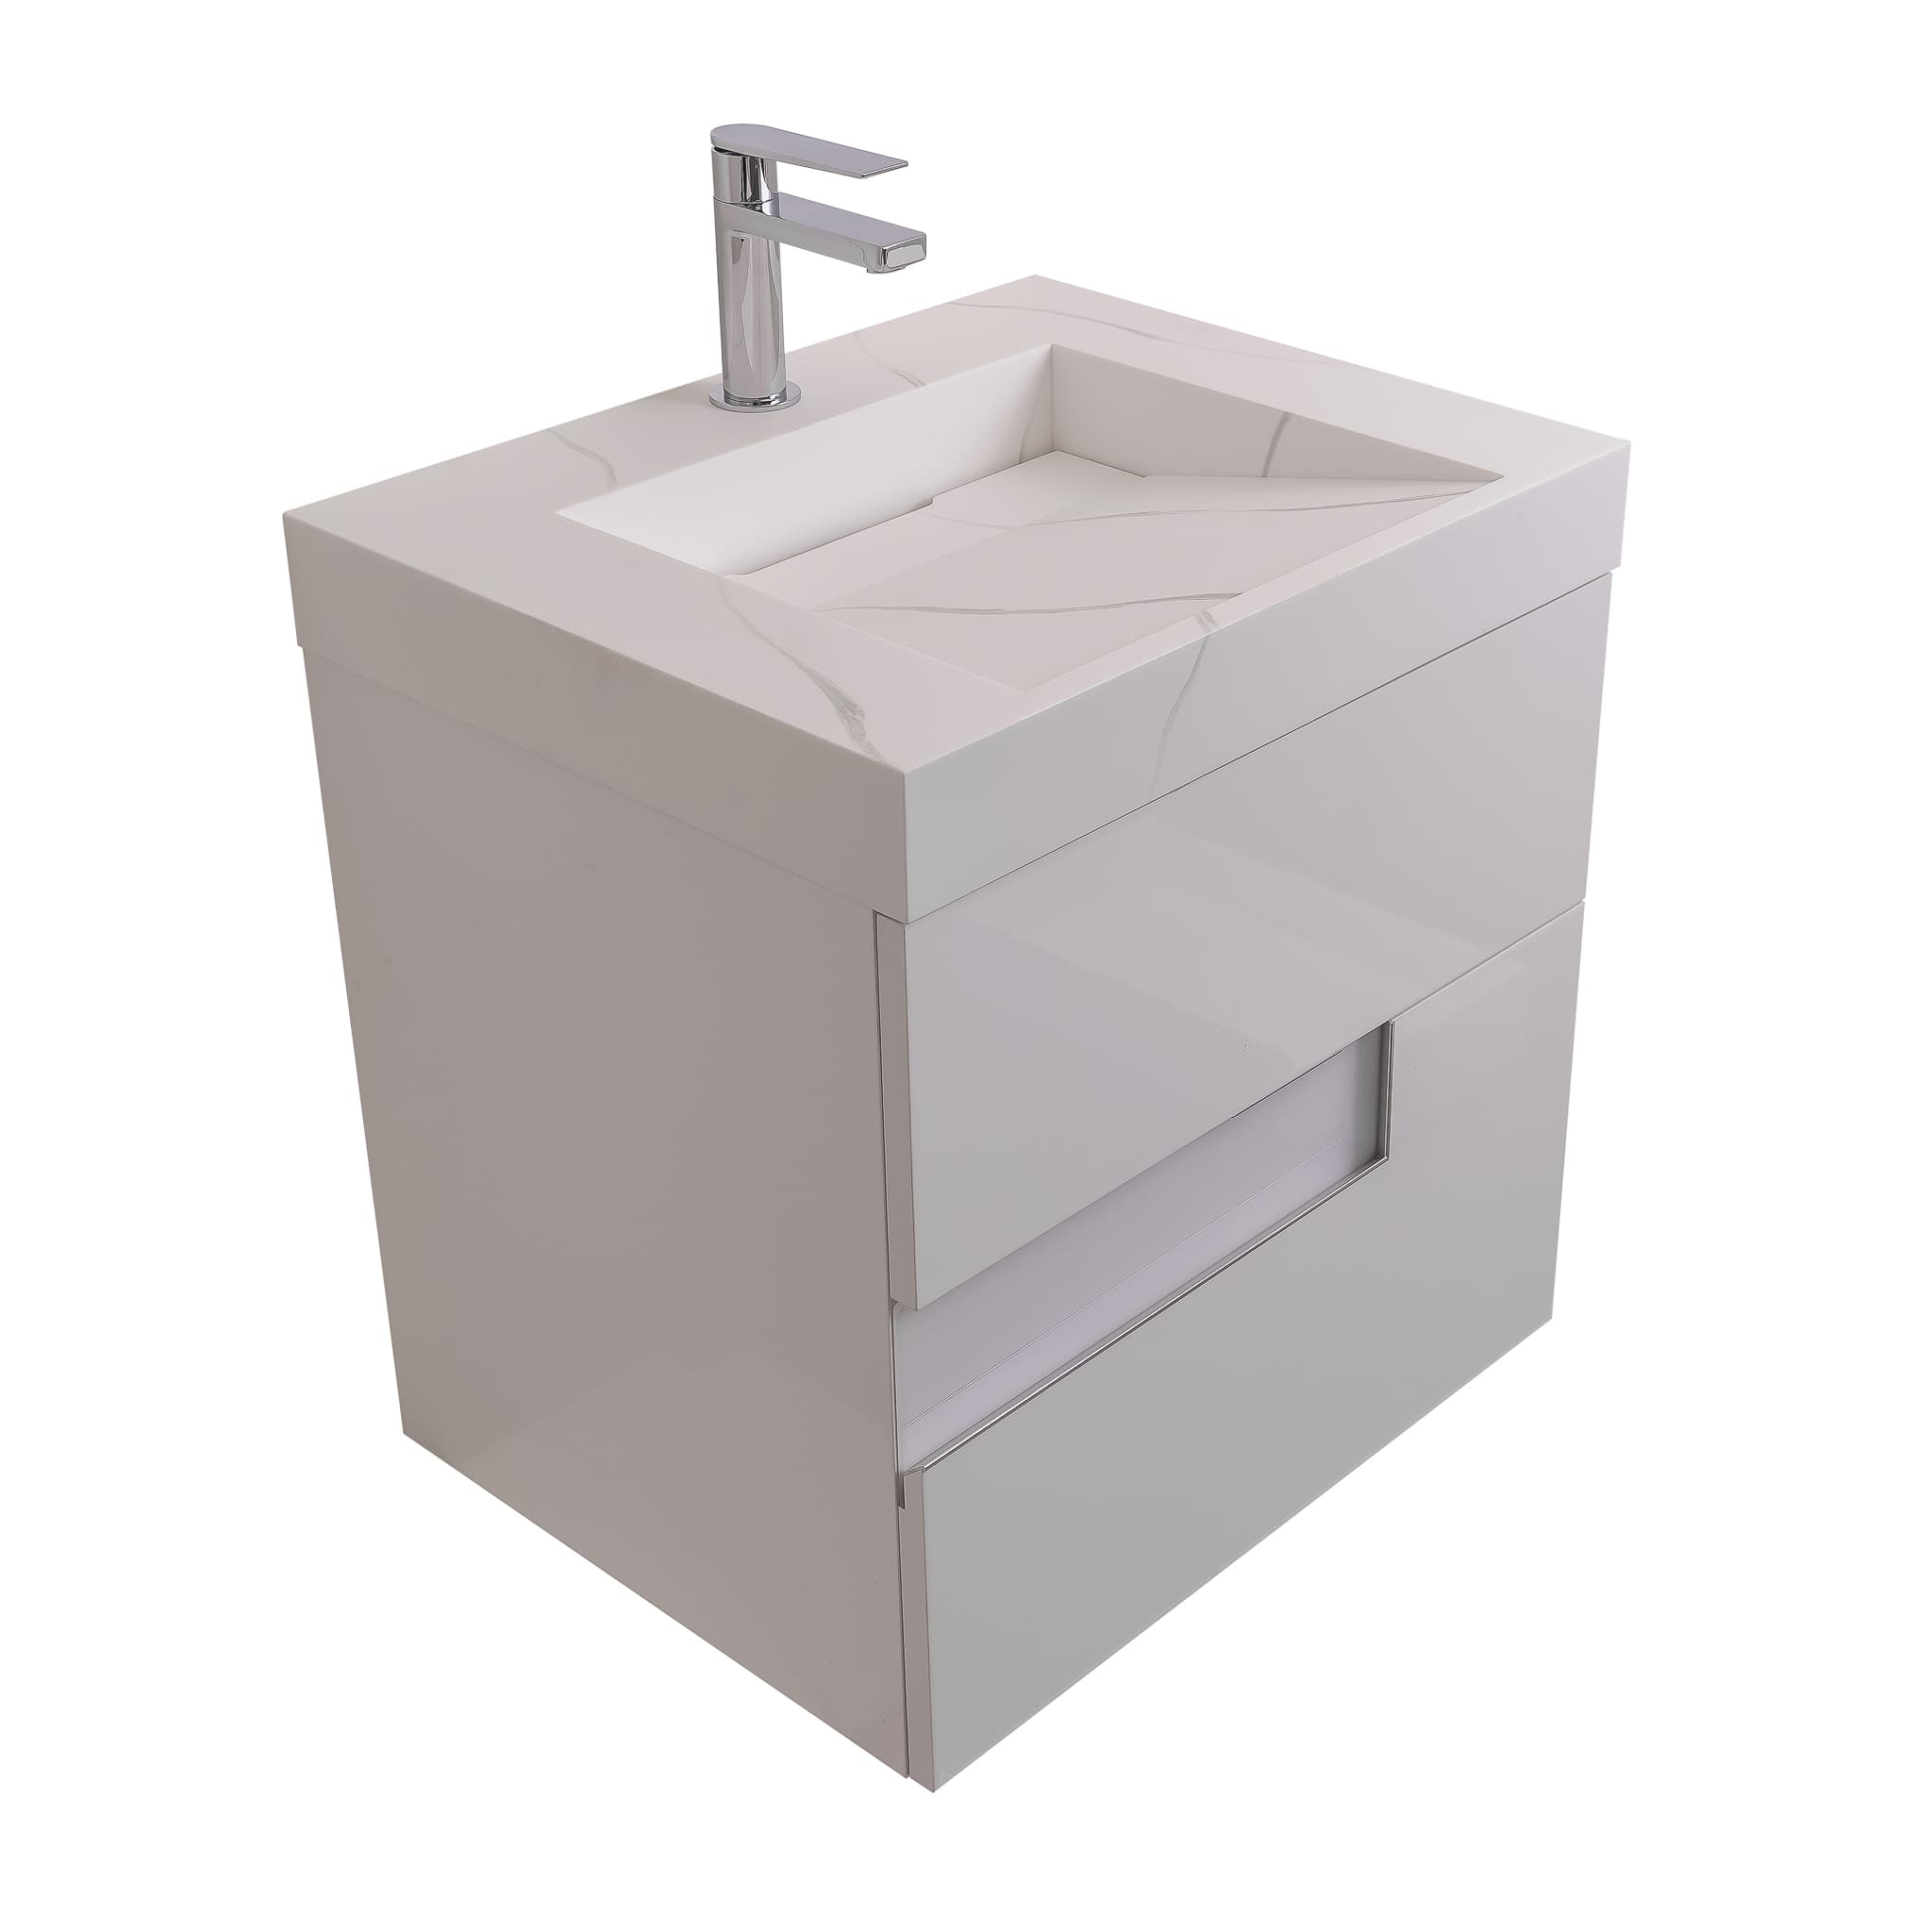 Vision 23.5 White High Gloss Cabinet, Solid Surface Matte White Top Carrara Infinity Sink, Wall Mounted Modern Vanity Set